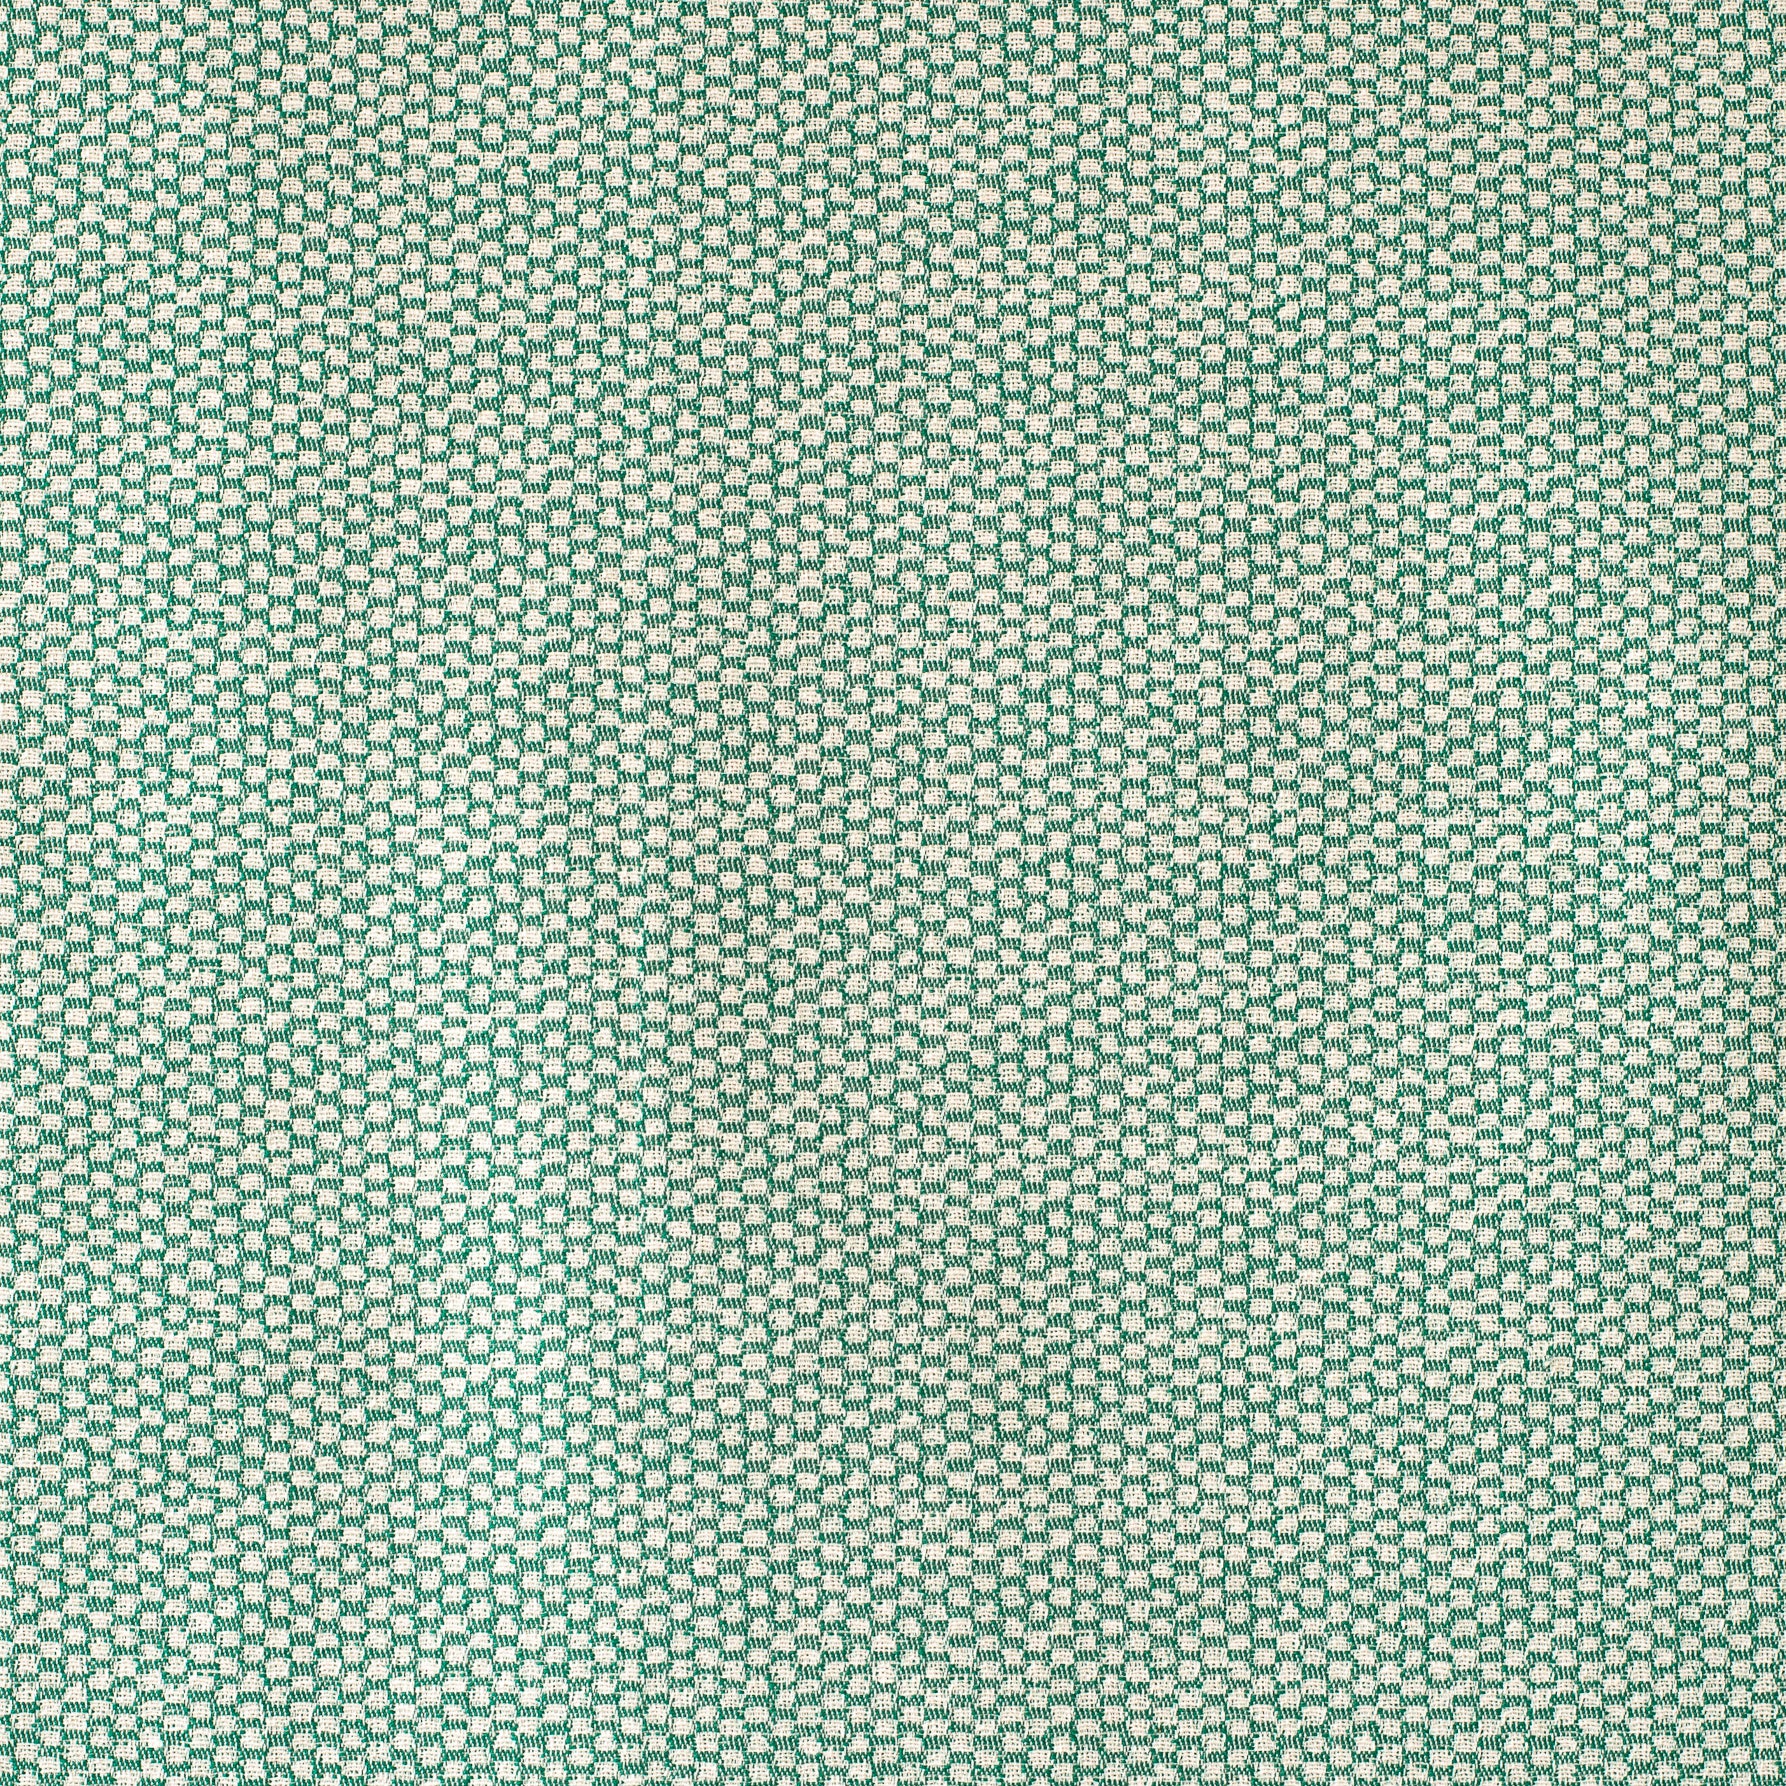 Detail of fabric in a dense checked weave in green and white.